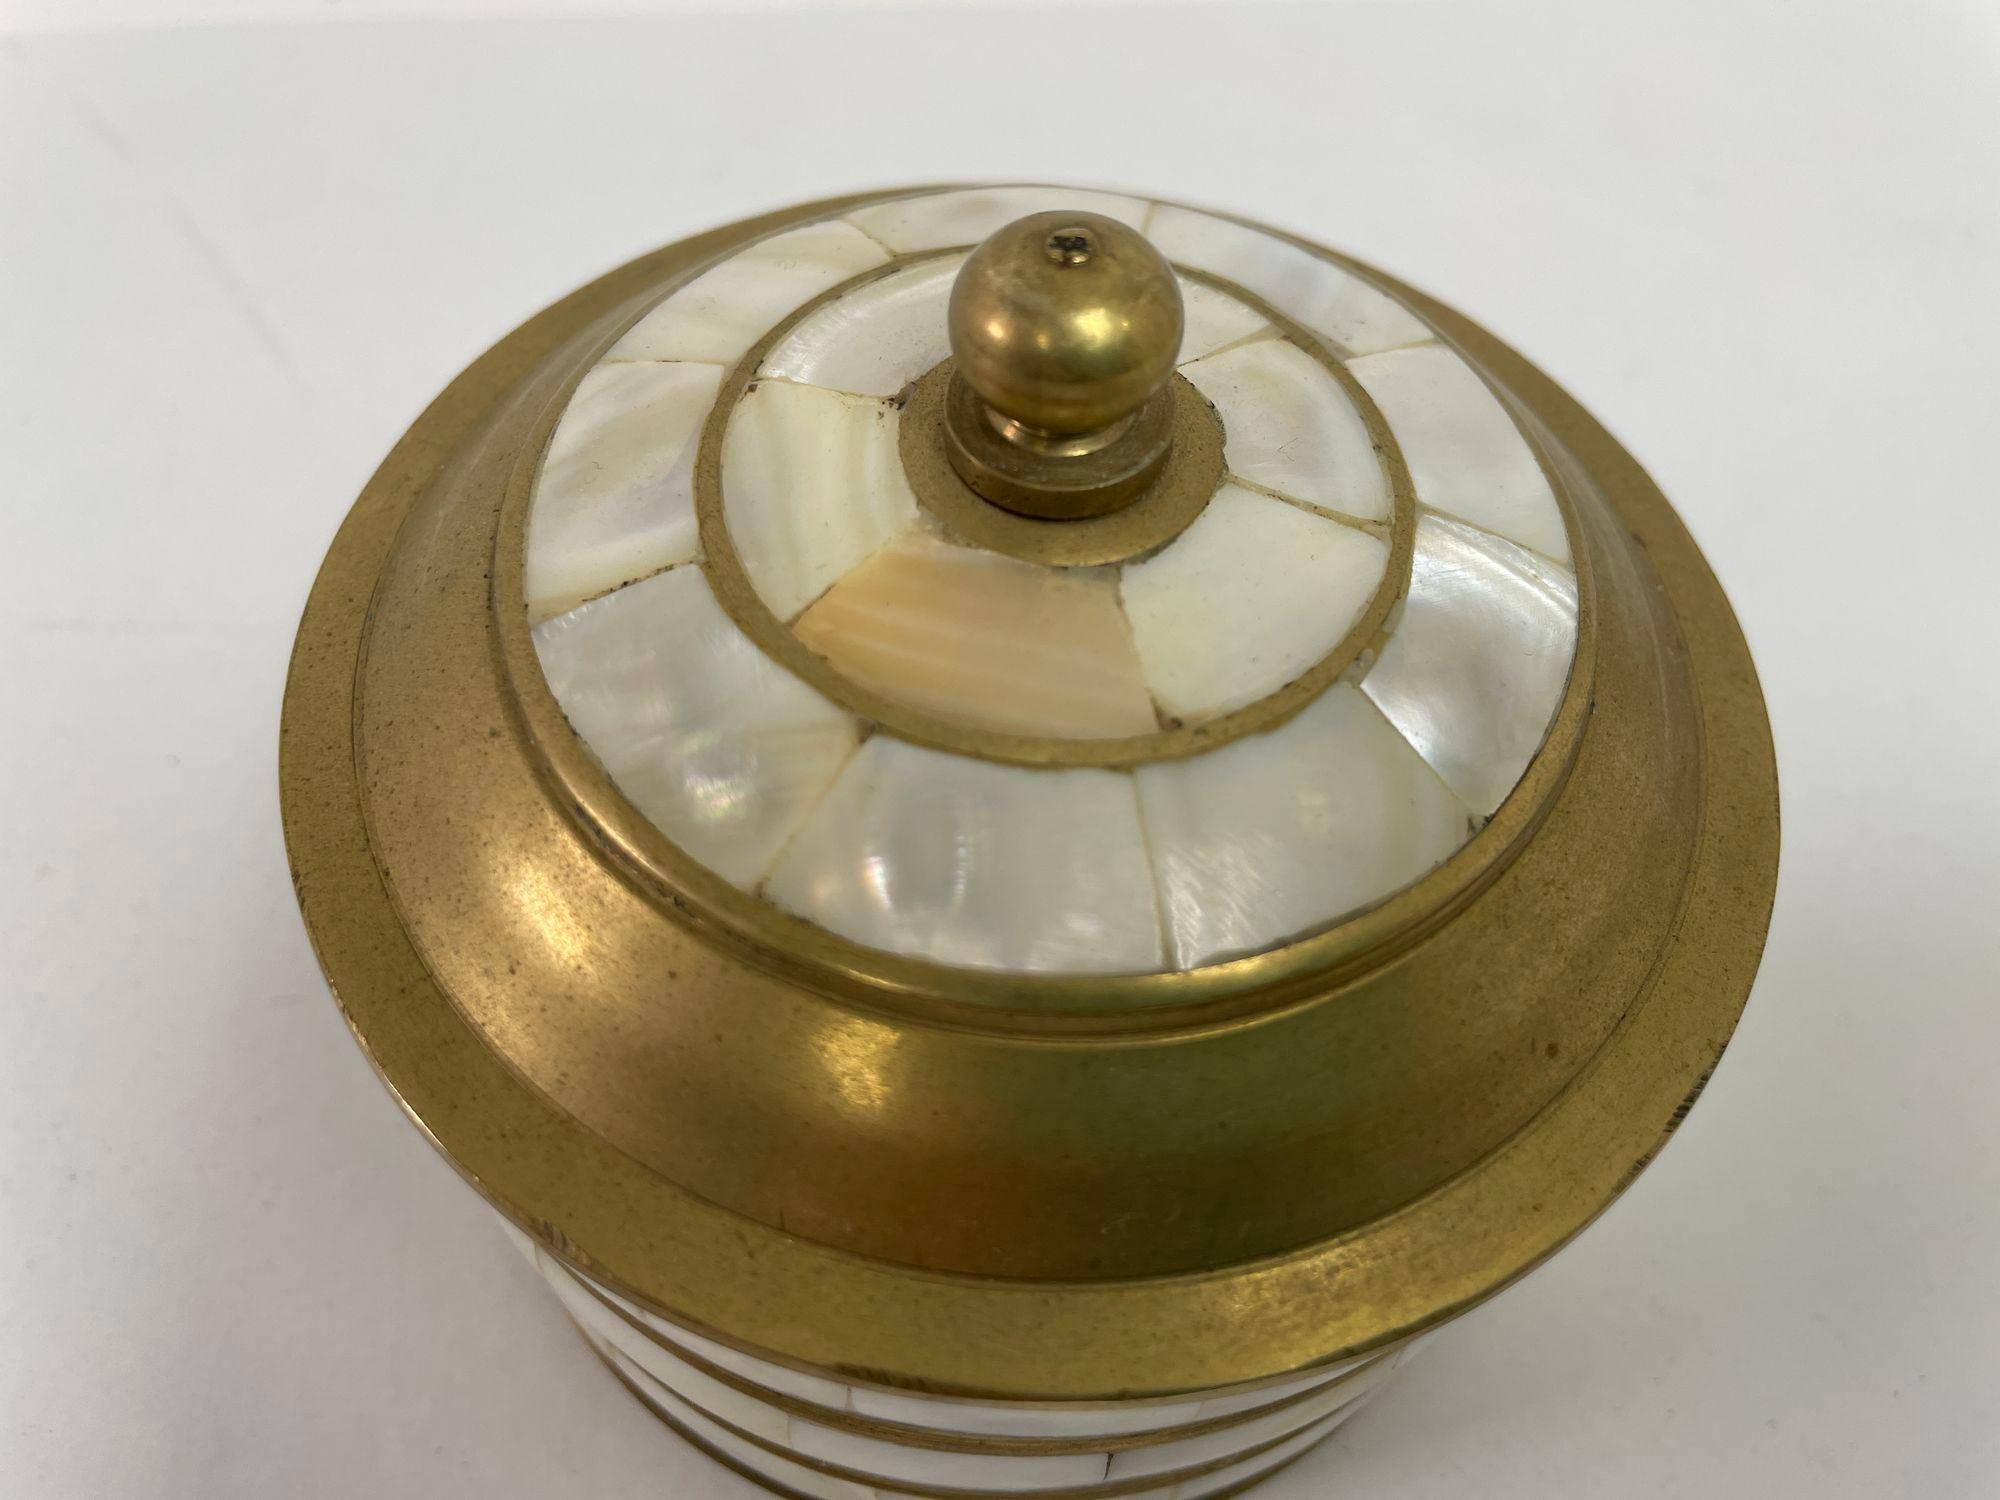 Vintage Round Trinket Lidded Brass Box with Mother of Pearl In Good Condition For Sale In North Hollywood, CA